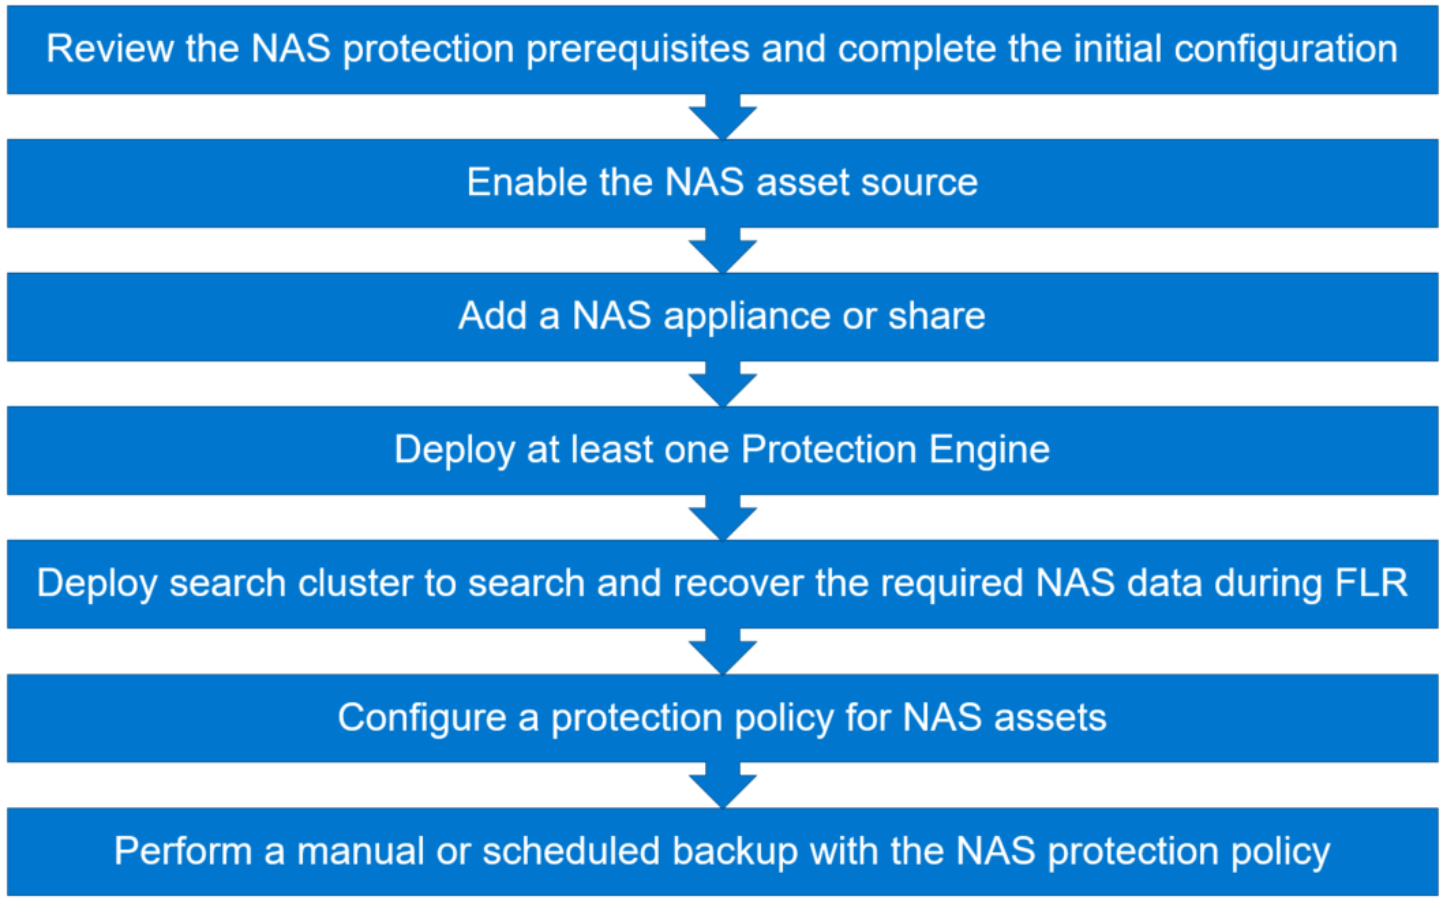 Image showing the steps to protect a NAS asset source with Data Manager using policies.